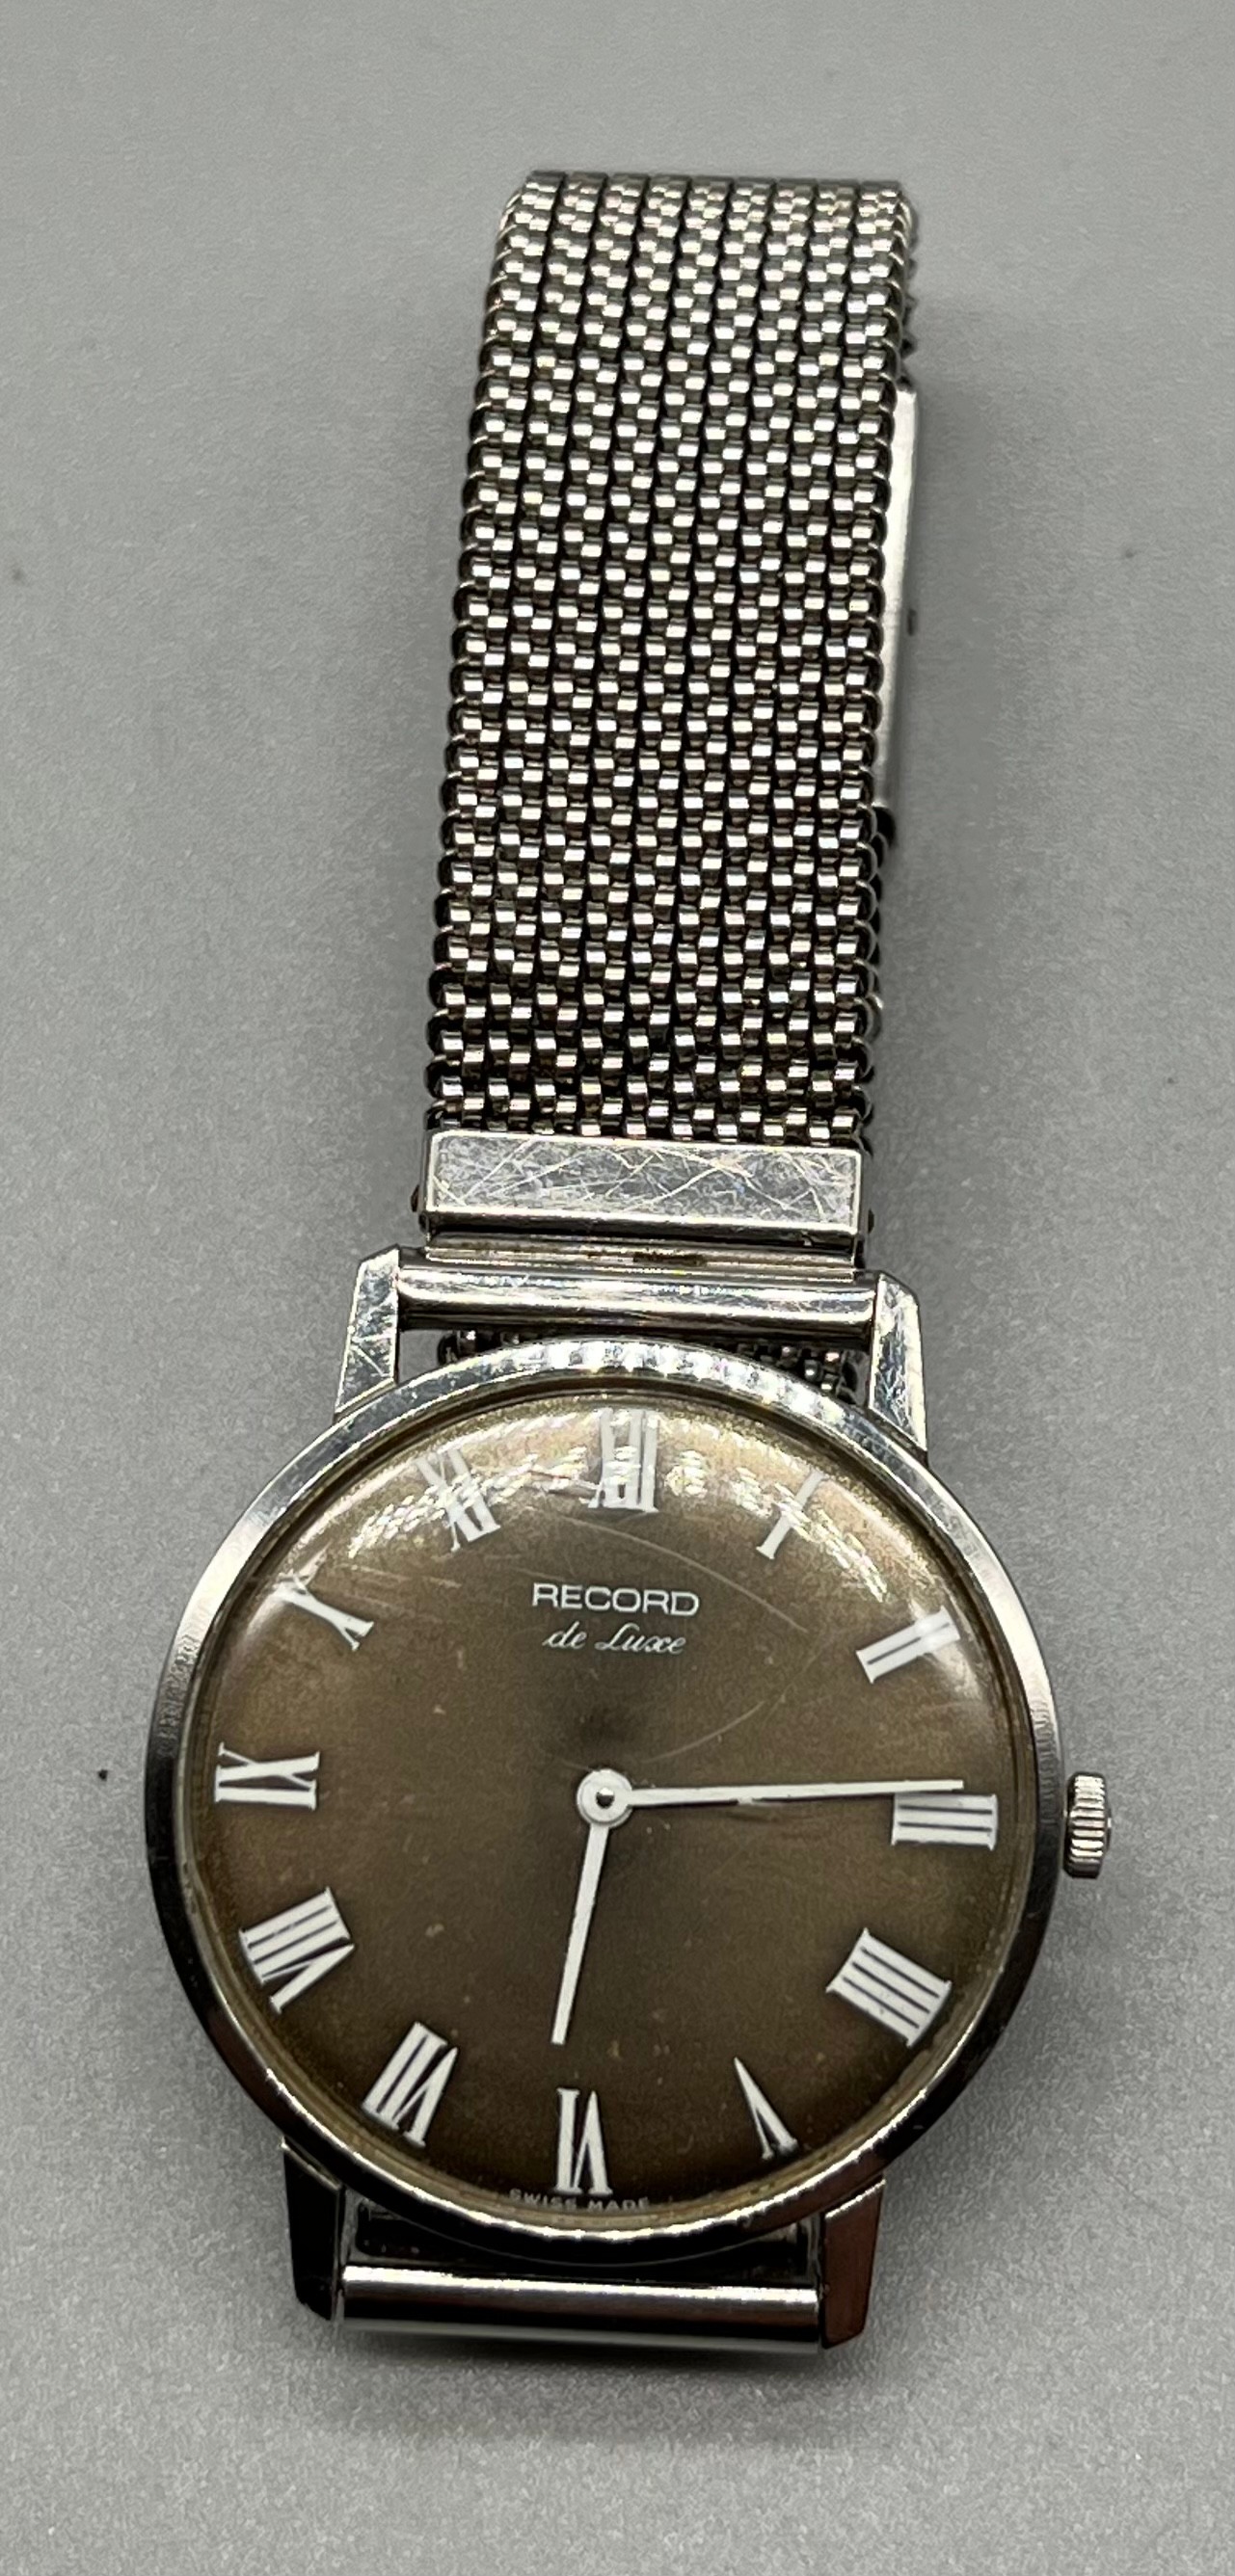 A Vintage Record de luxe gent's evening watch. Number to back plate 501048. [In a working condition]